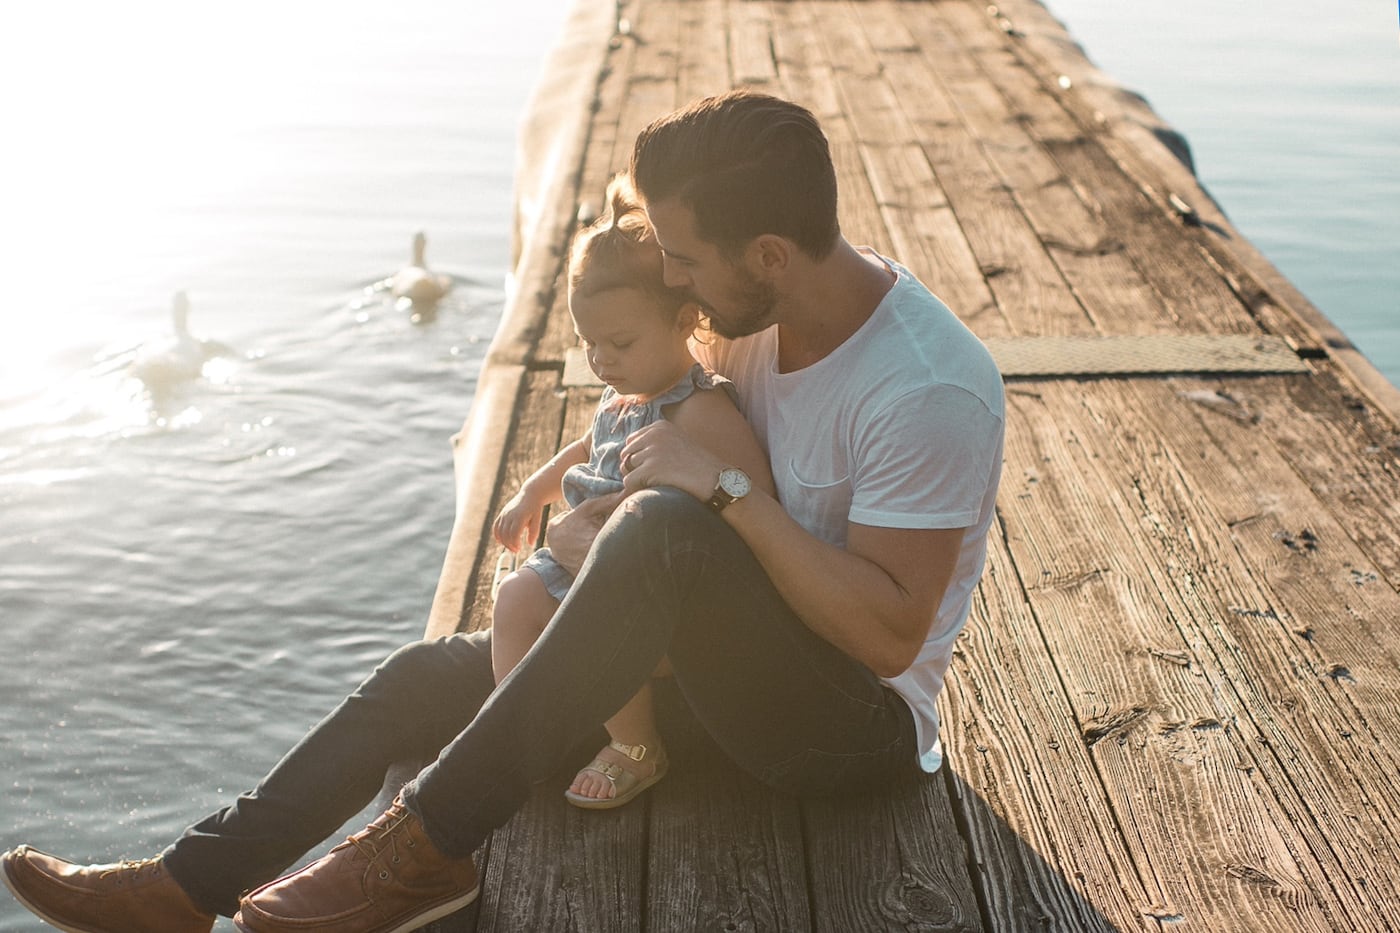 Father sitting with his toddler daughter on dock on the water.